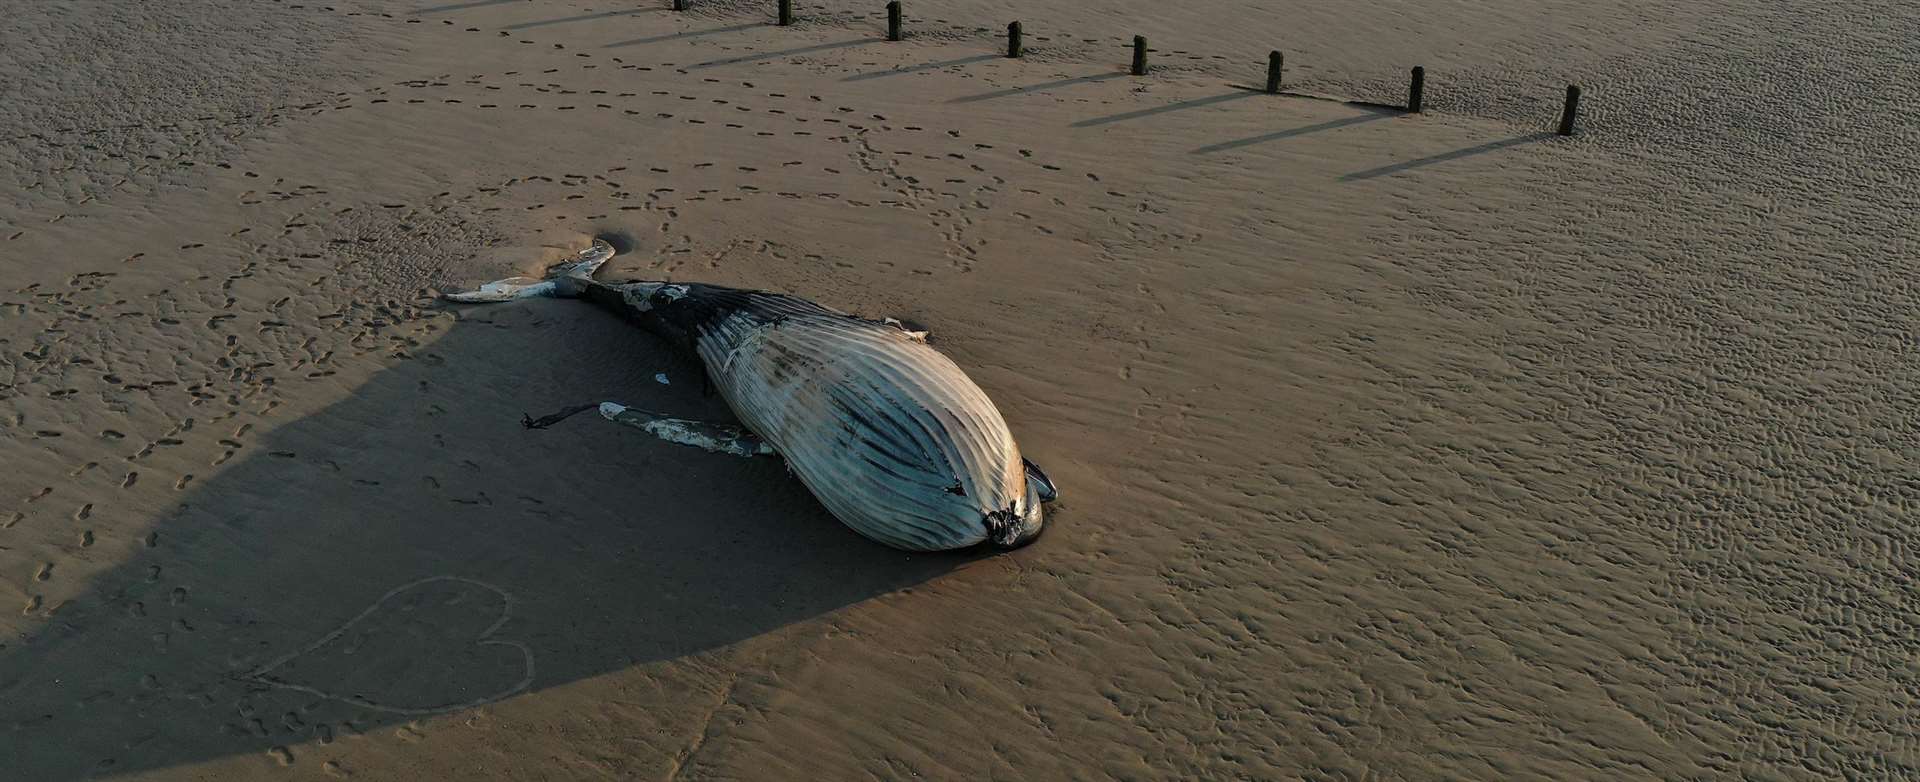 The whale is thought to be around 30ft long. Picture: UKNIP